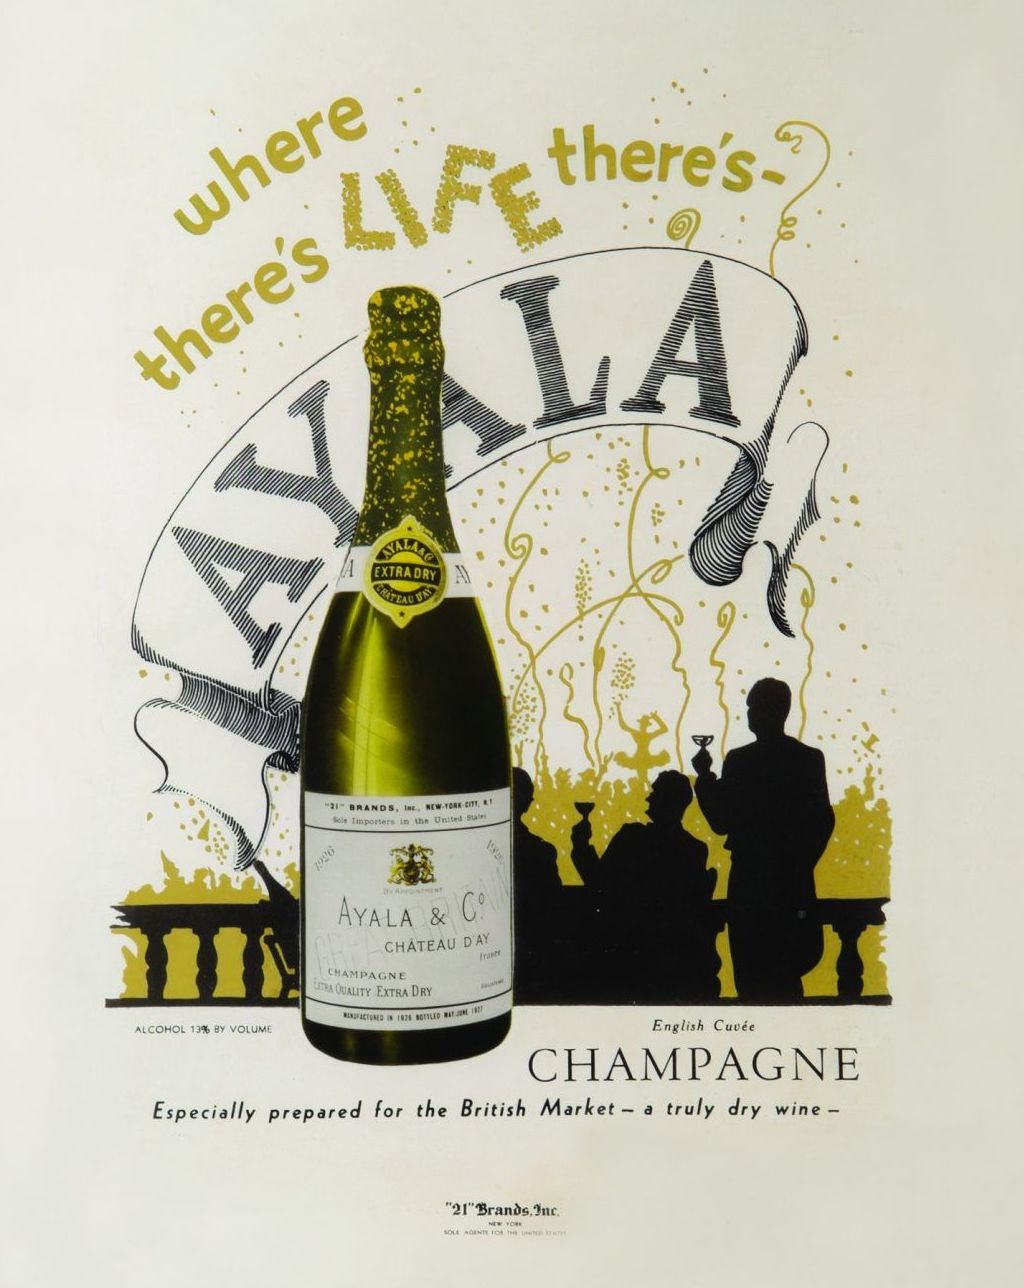 Champagne AYALA poster from 1920s